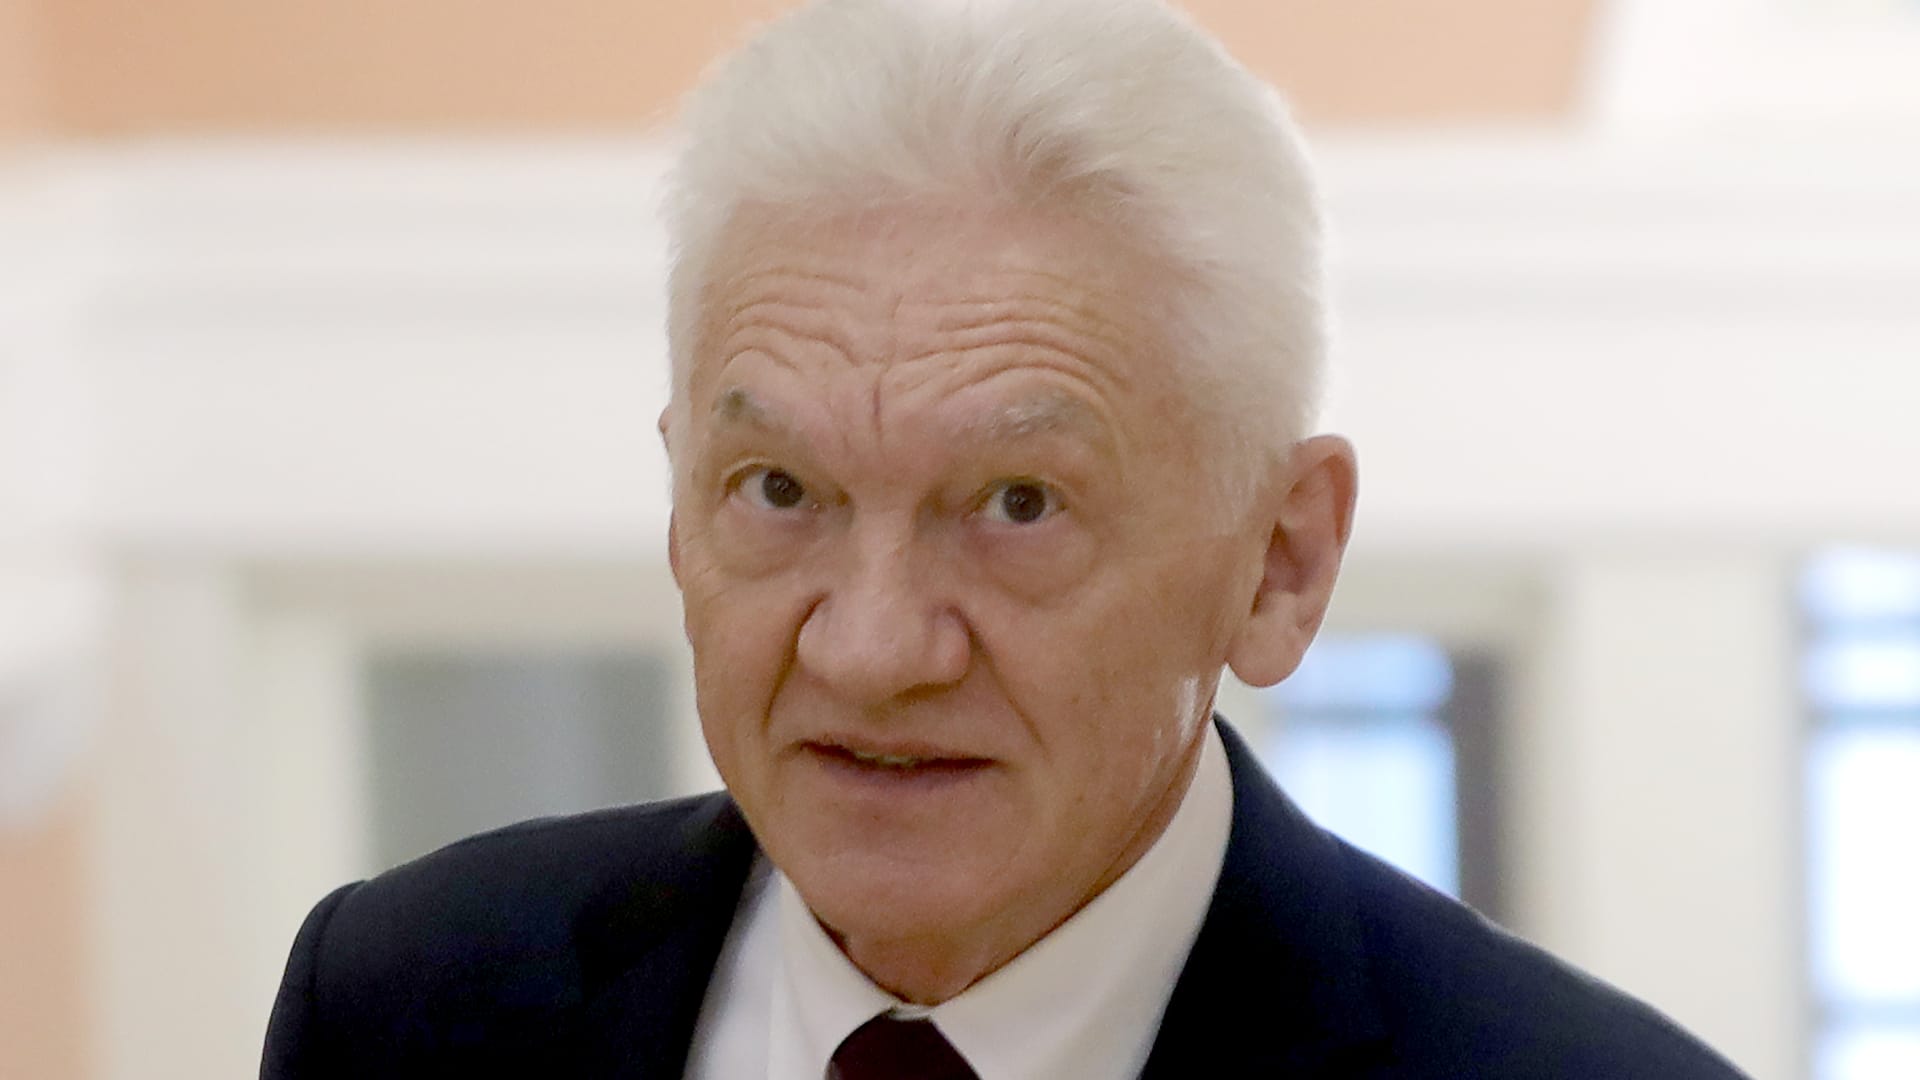 Gennady Timchenko, a member of the Novatek and Sibur Holding Boards, attends the 2021 Russian Geographical Society Prize ceremony at the Central House of the Russian Army.